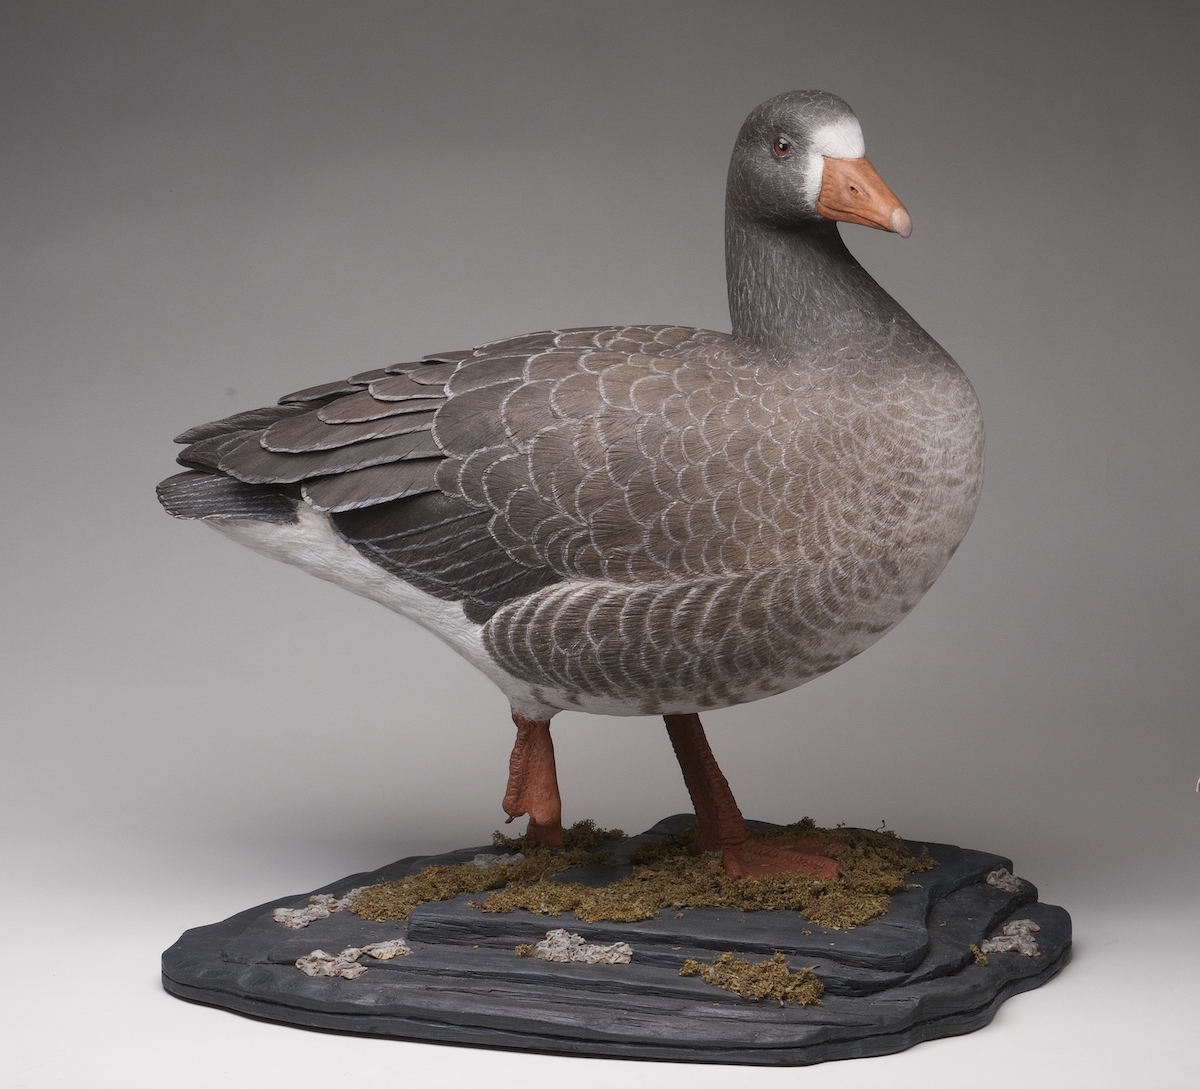 2nd Best of Show - Waterfowl, Open: David Koss - White-fronted Goose